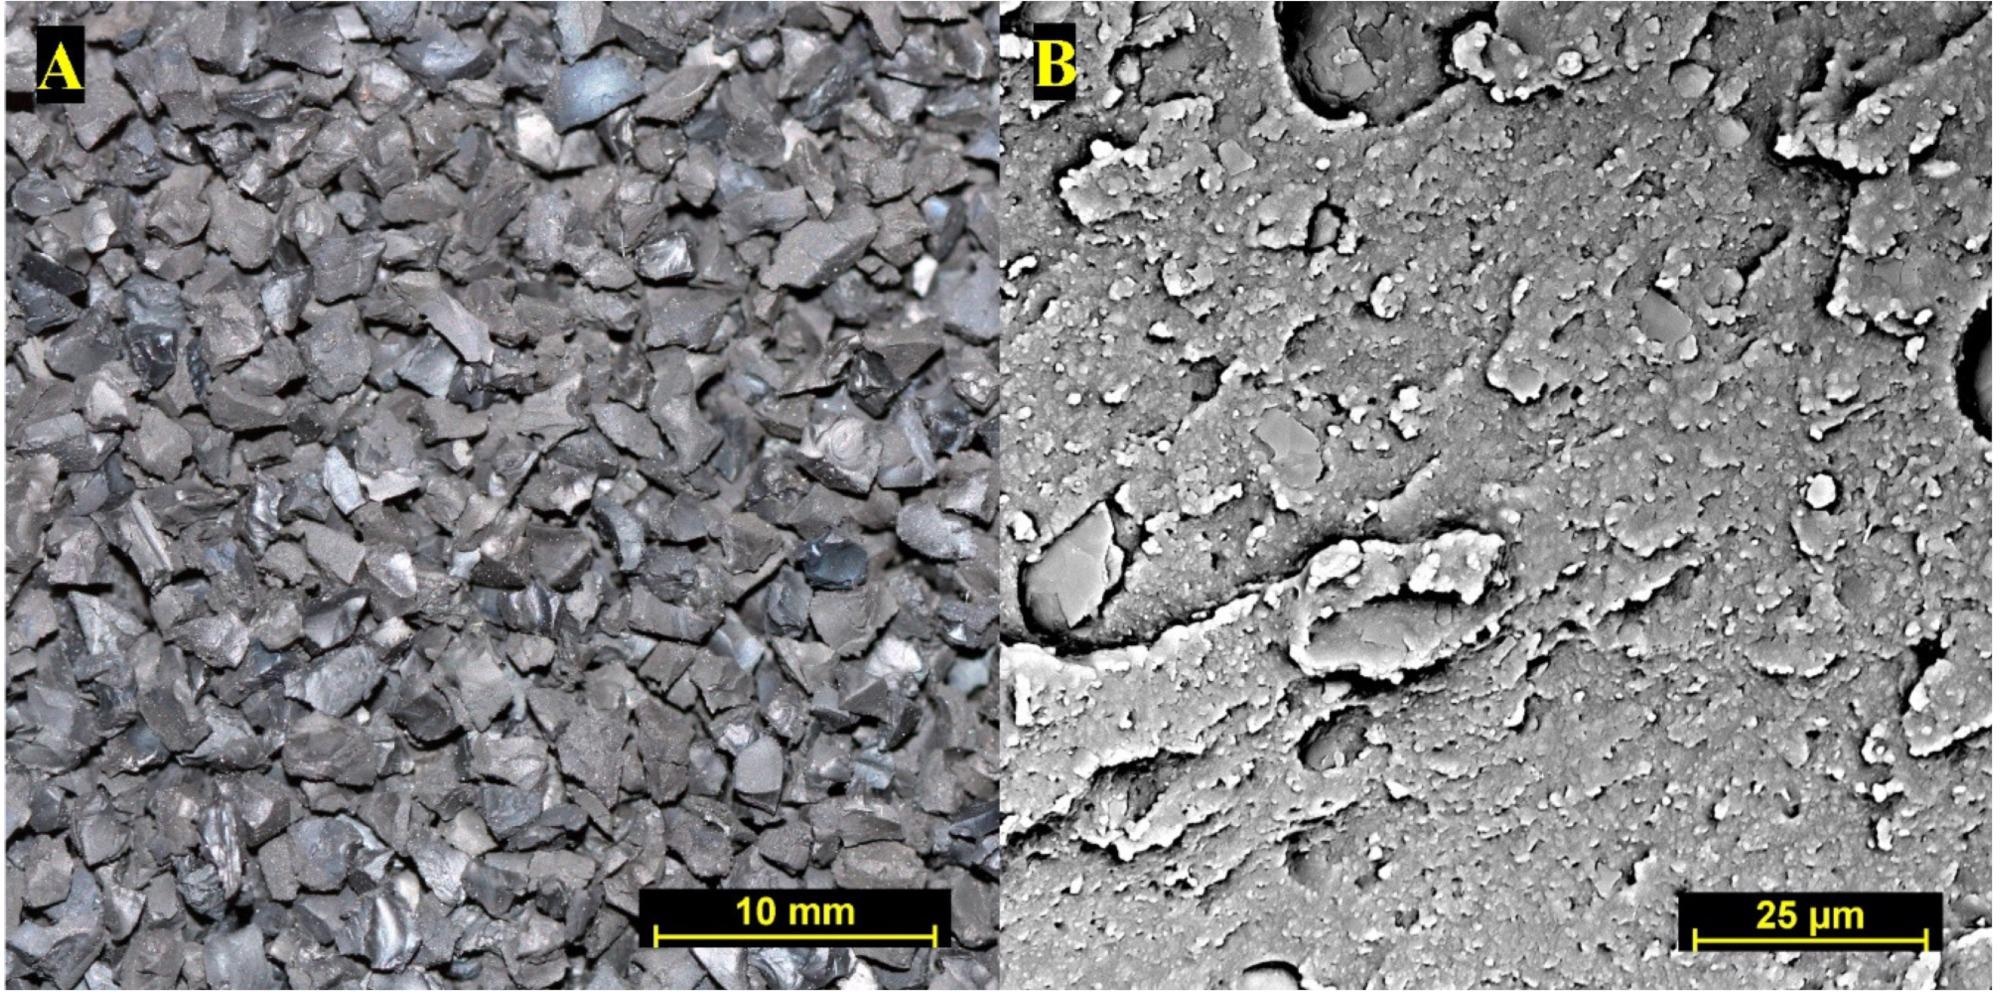 (A)—Macroimage of studied rubber crumb; (B)—SEM image of rubber crumb sample at 2500× magnification.